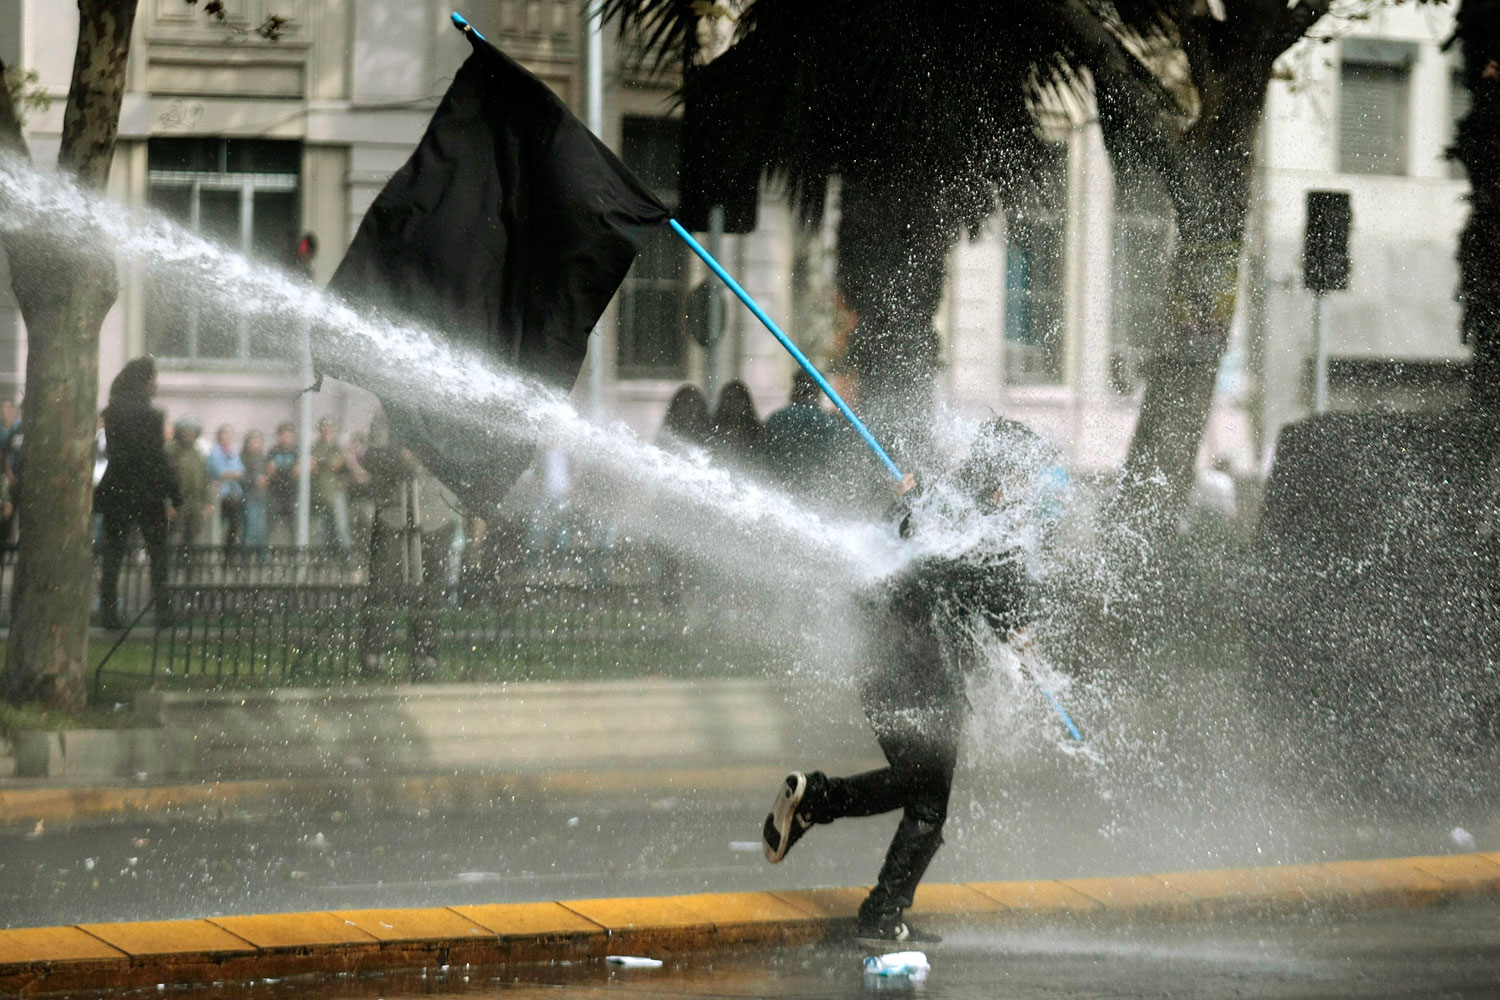 May 1, 2012. A protester gets sprayed by a water canon during a May Day march in Santiago, Chile. Clashes with security forces and riots marred the rally to mark International Labor Day.